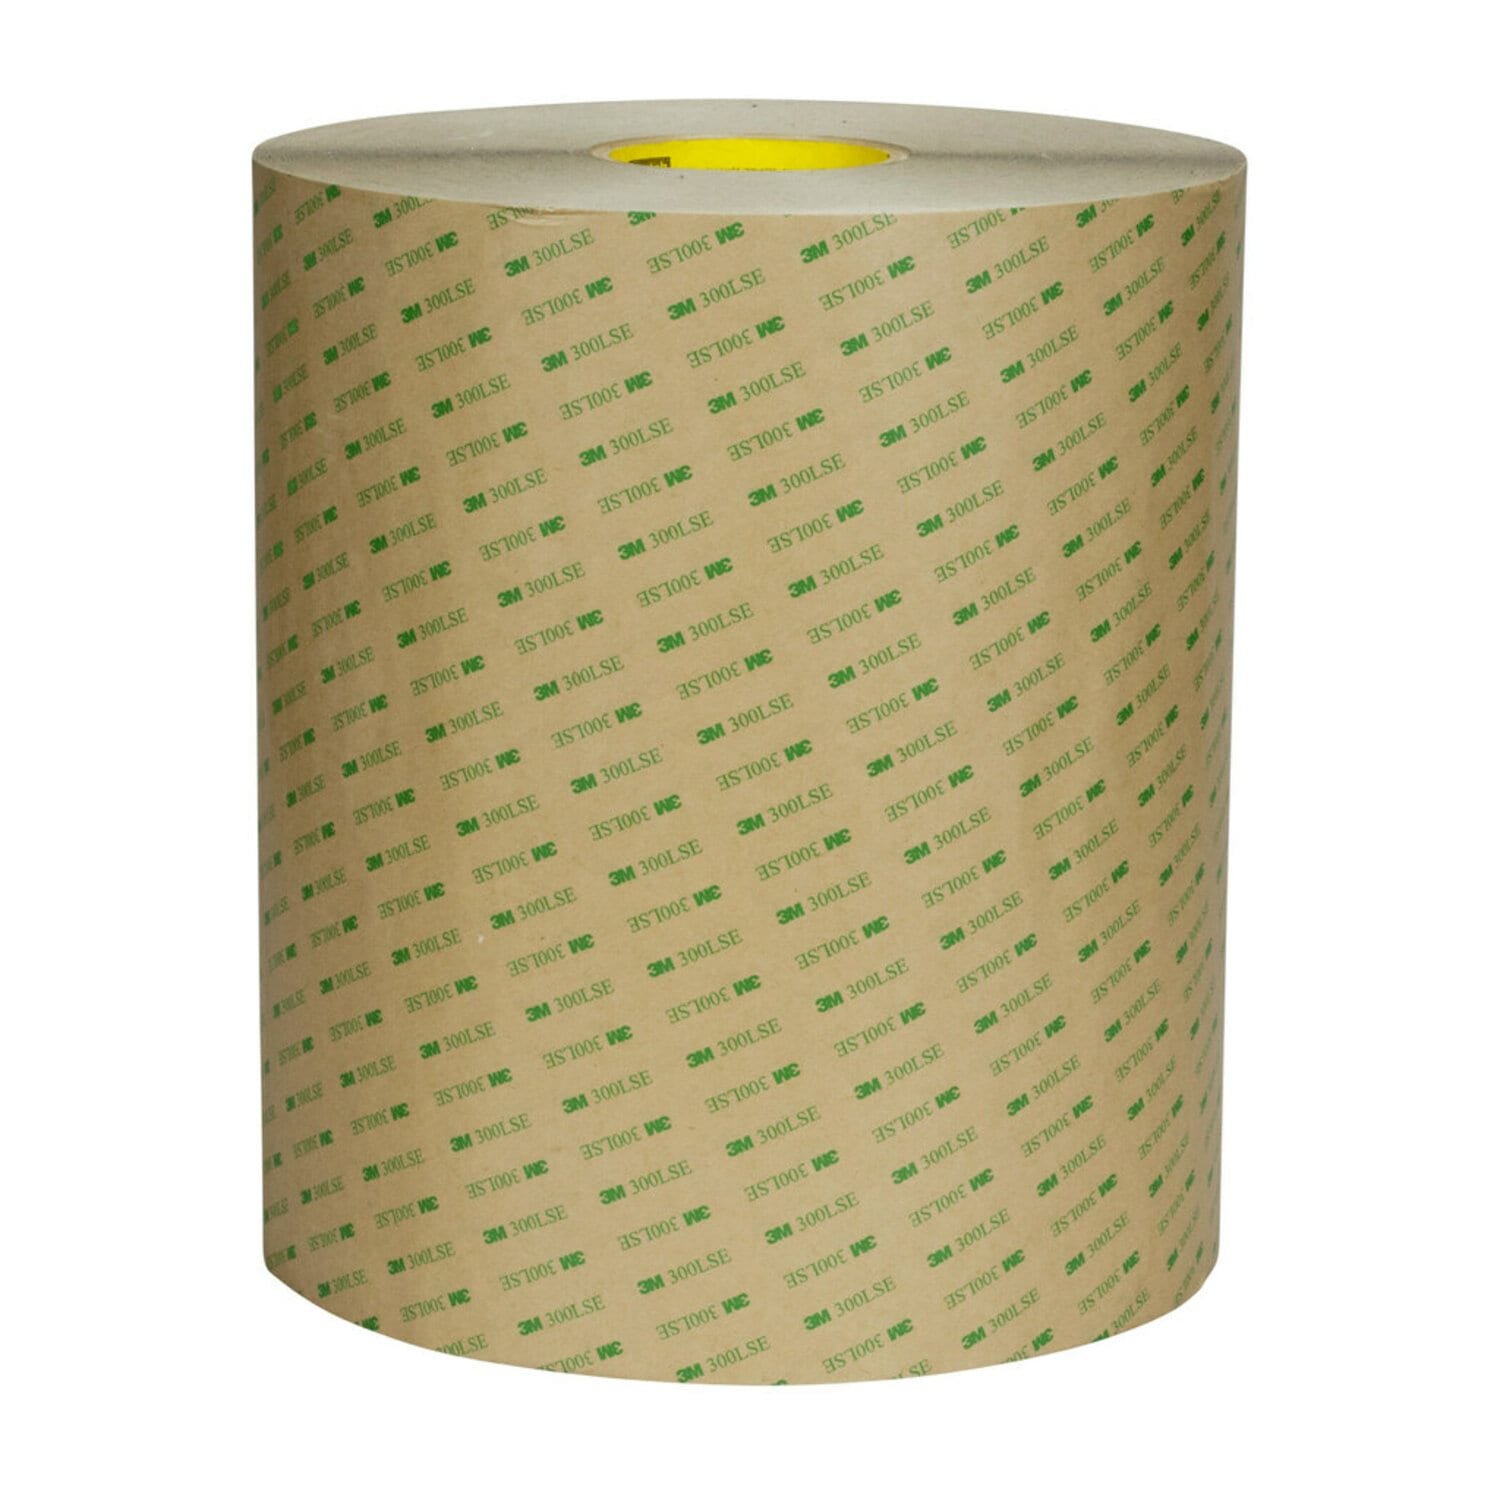 7000001493 - 3M Double Coated Tape 93020LE, Clear, 54 in x 60 yd, 7.9 mil, 1 roll
per case